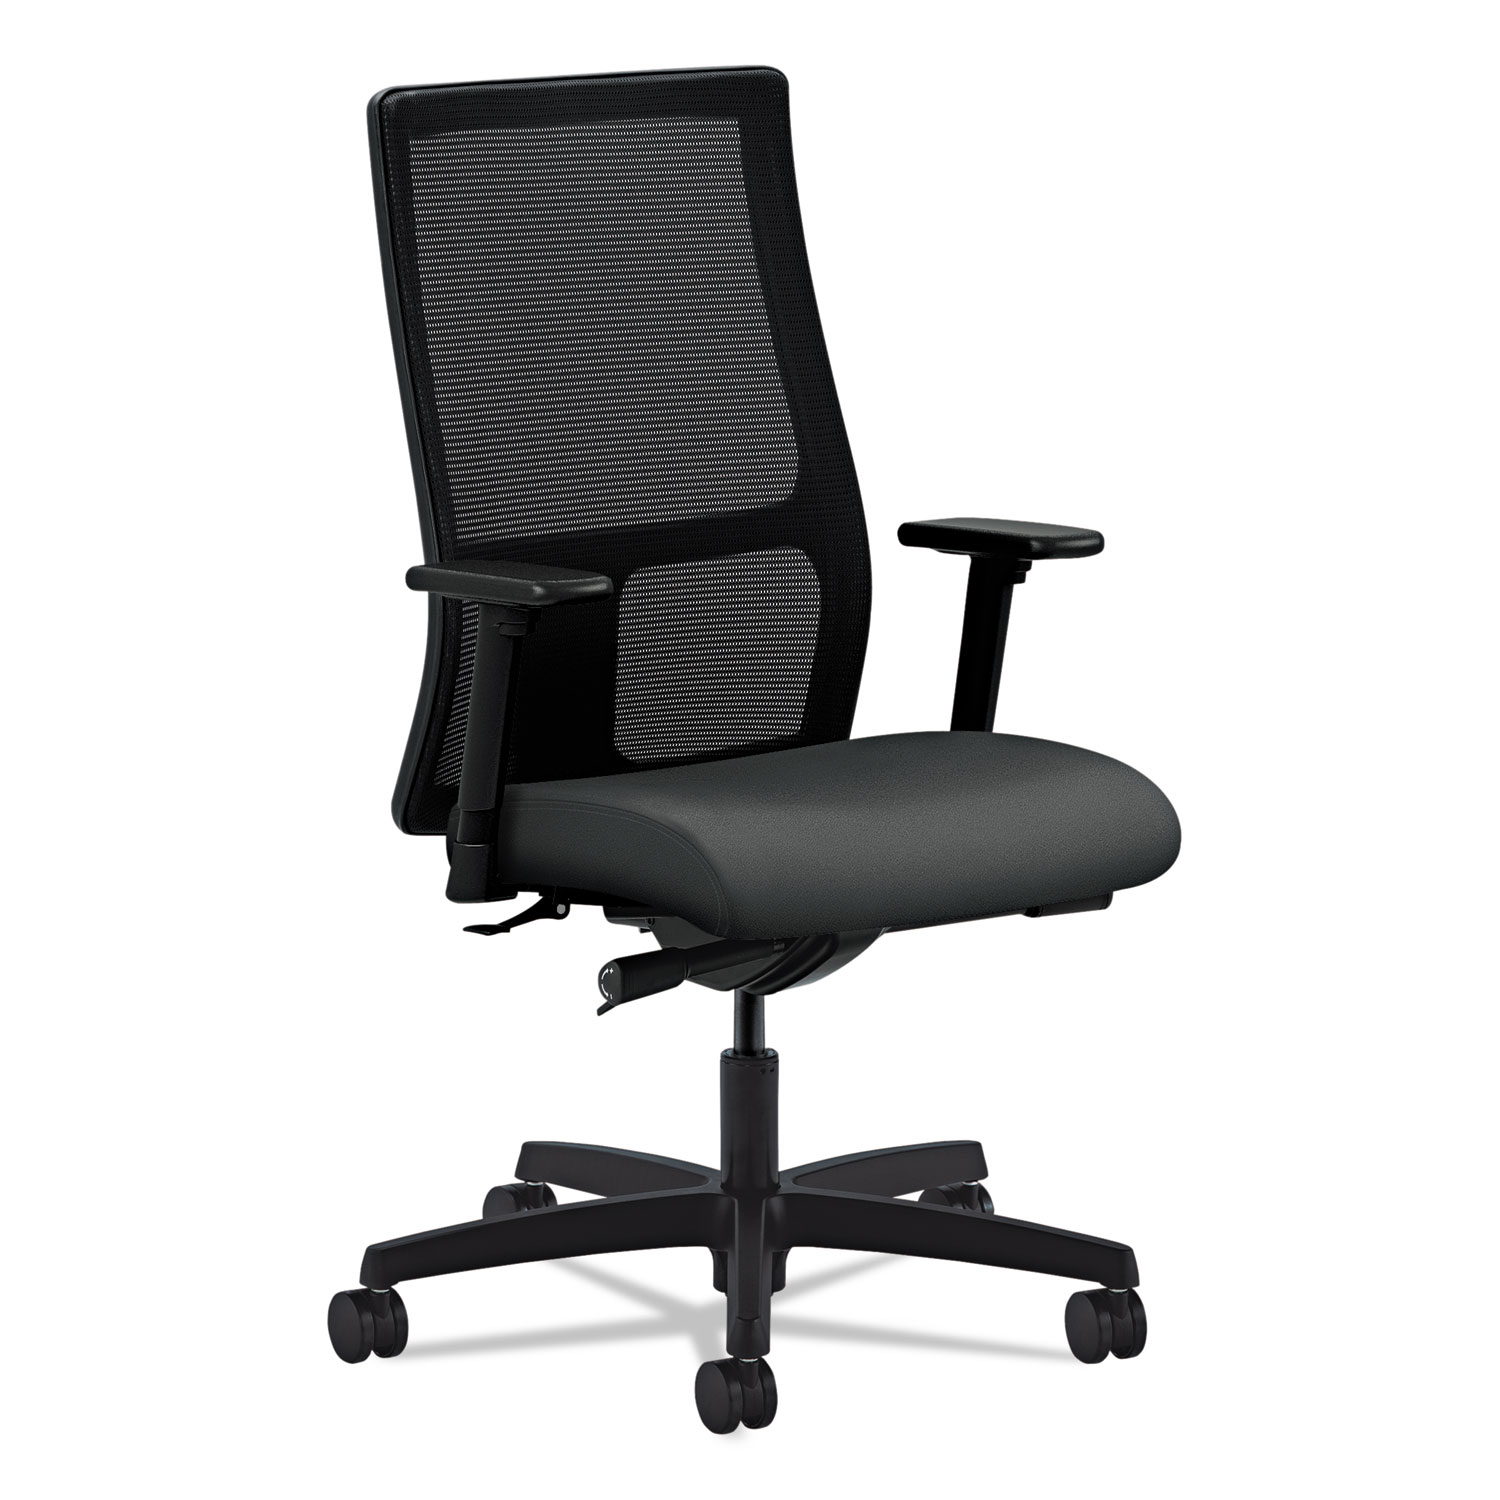 Ignition Series Mesh Mid-Back Work Chair, Iron Ore Fabric Upholstered Seat